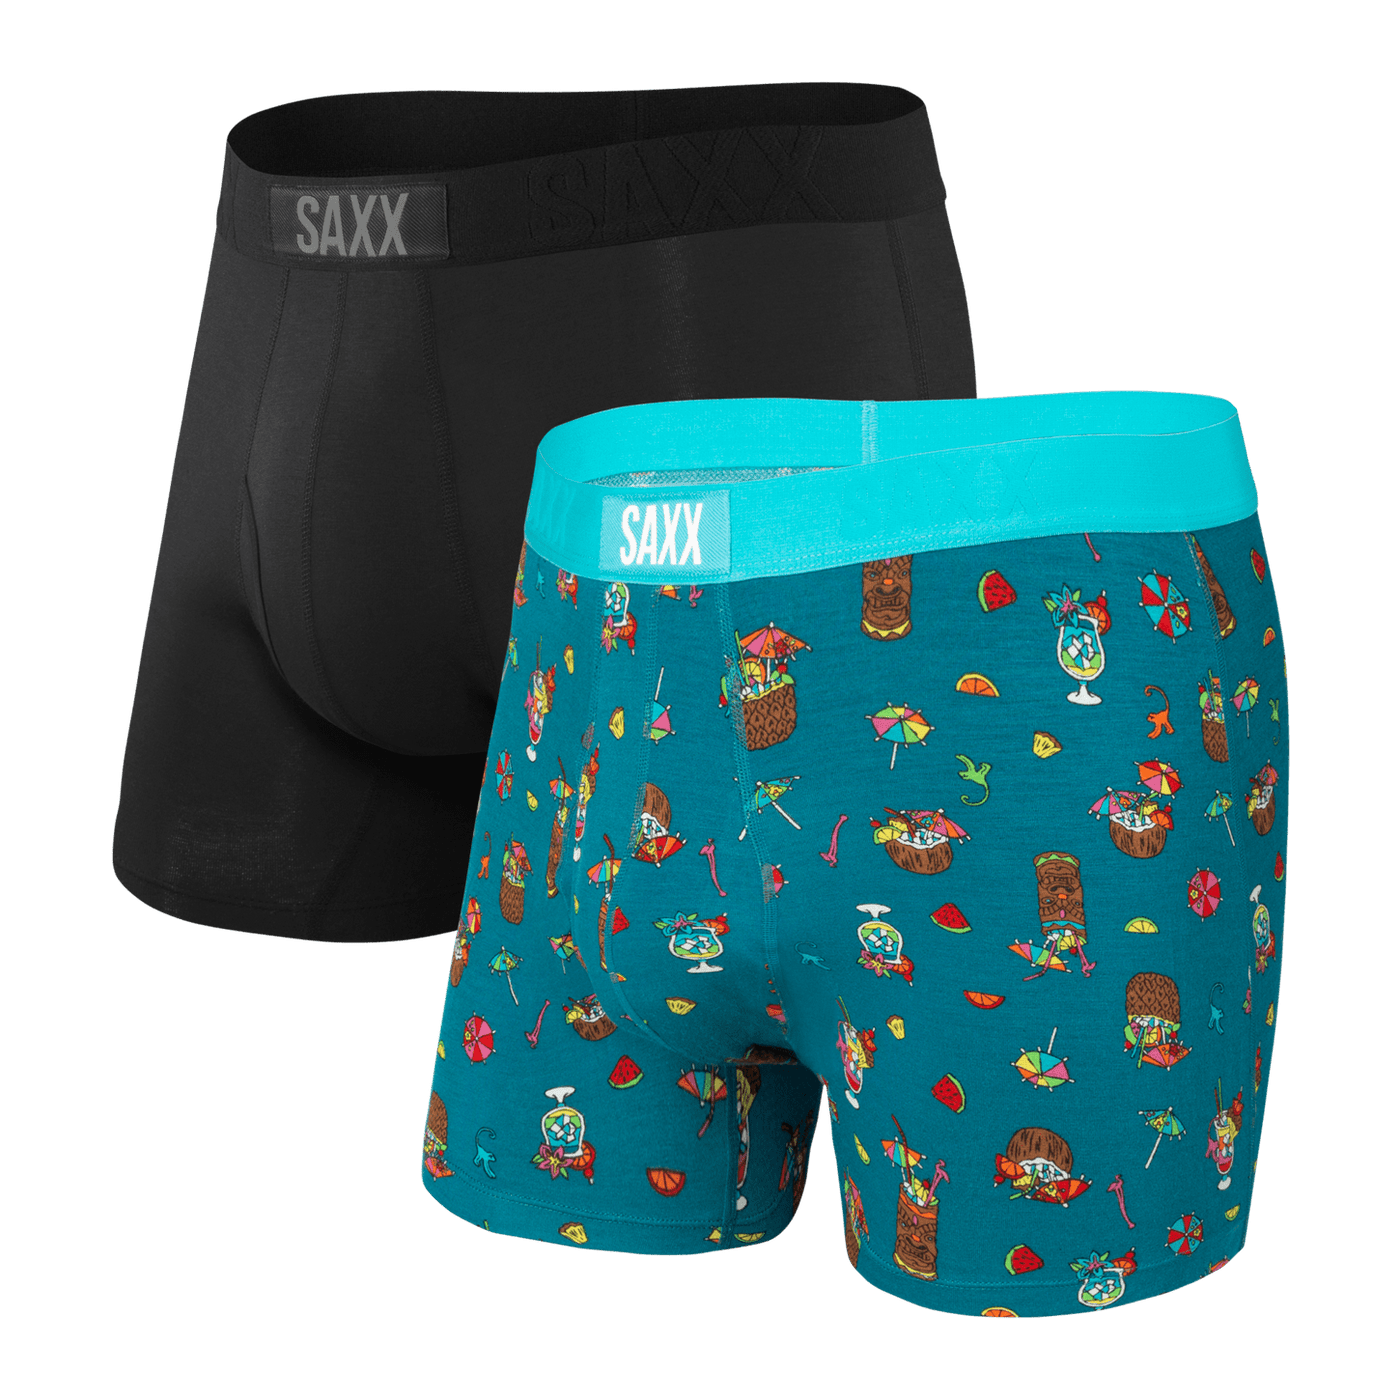 Saxx Ultra Boxers - Coconut Drinks / Black (2 Pack) - The Hockey Shop Source For Sports